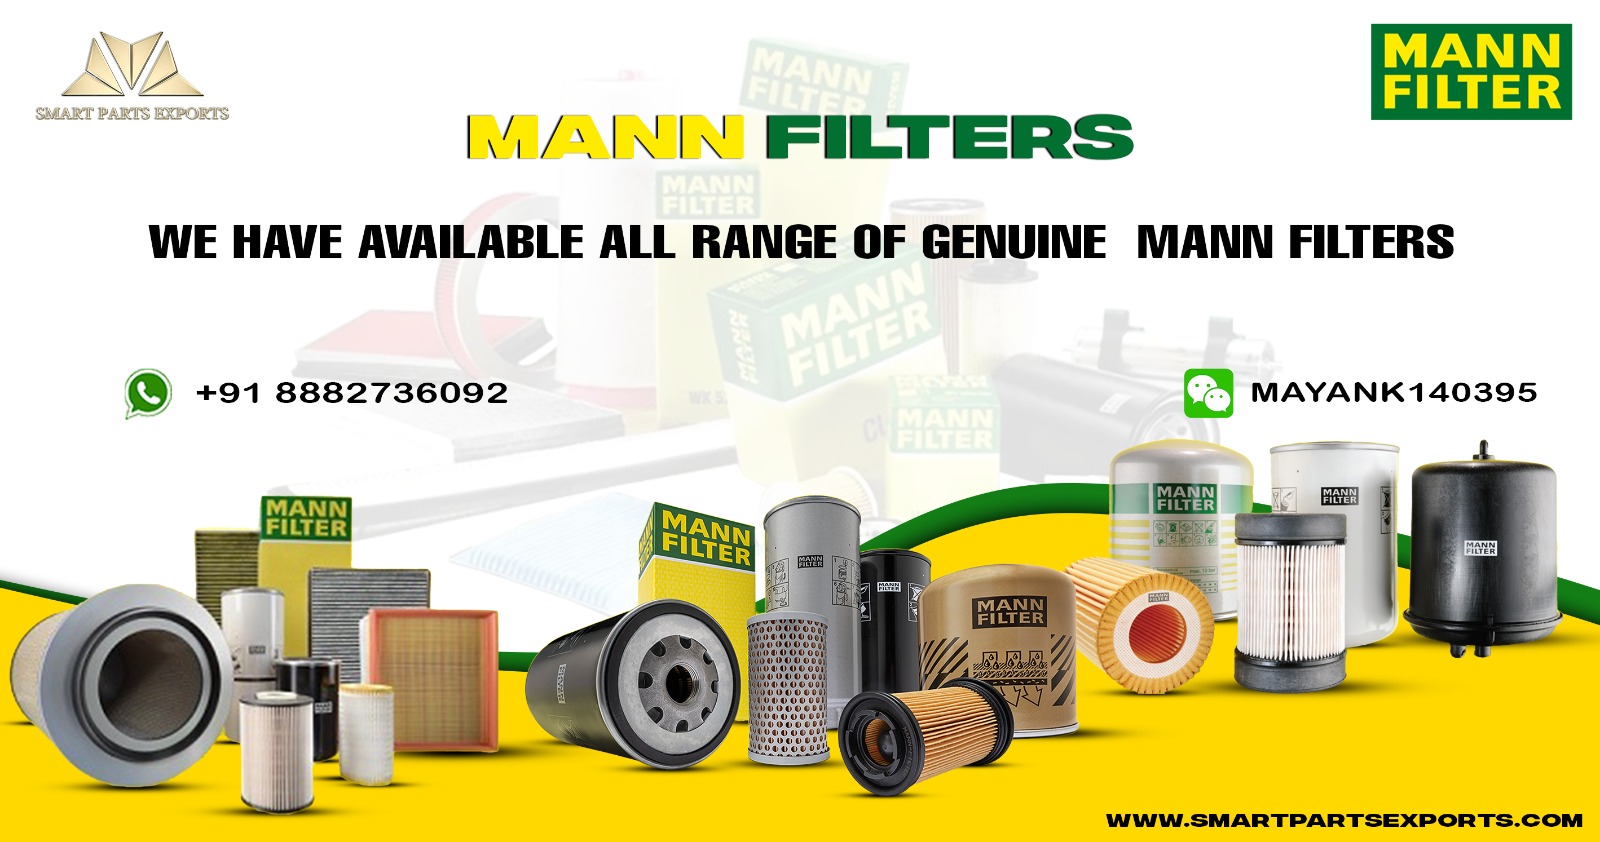 Mann filters Air, Oil, and Fuel filters at the best prices